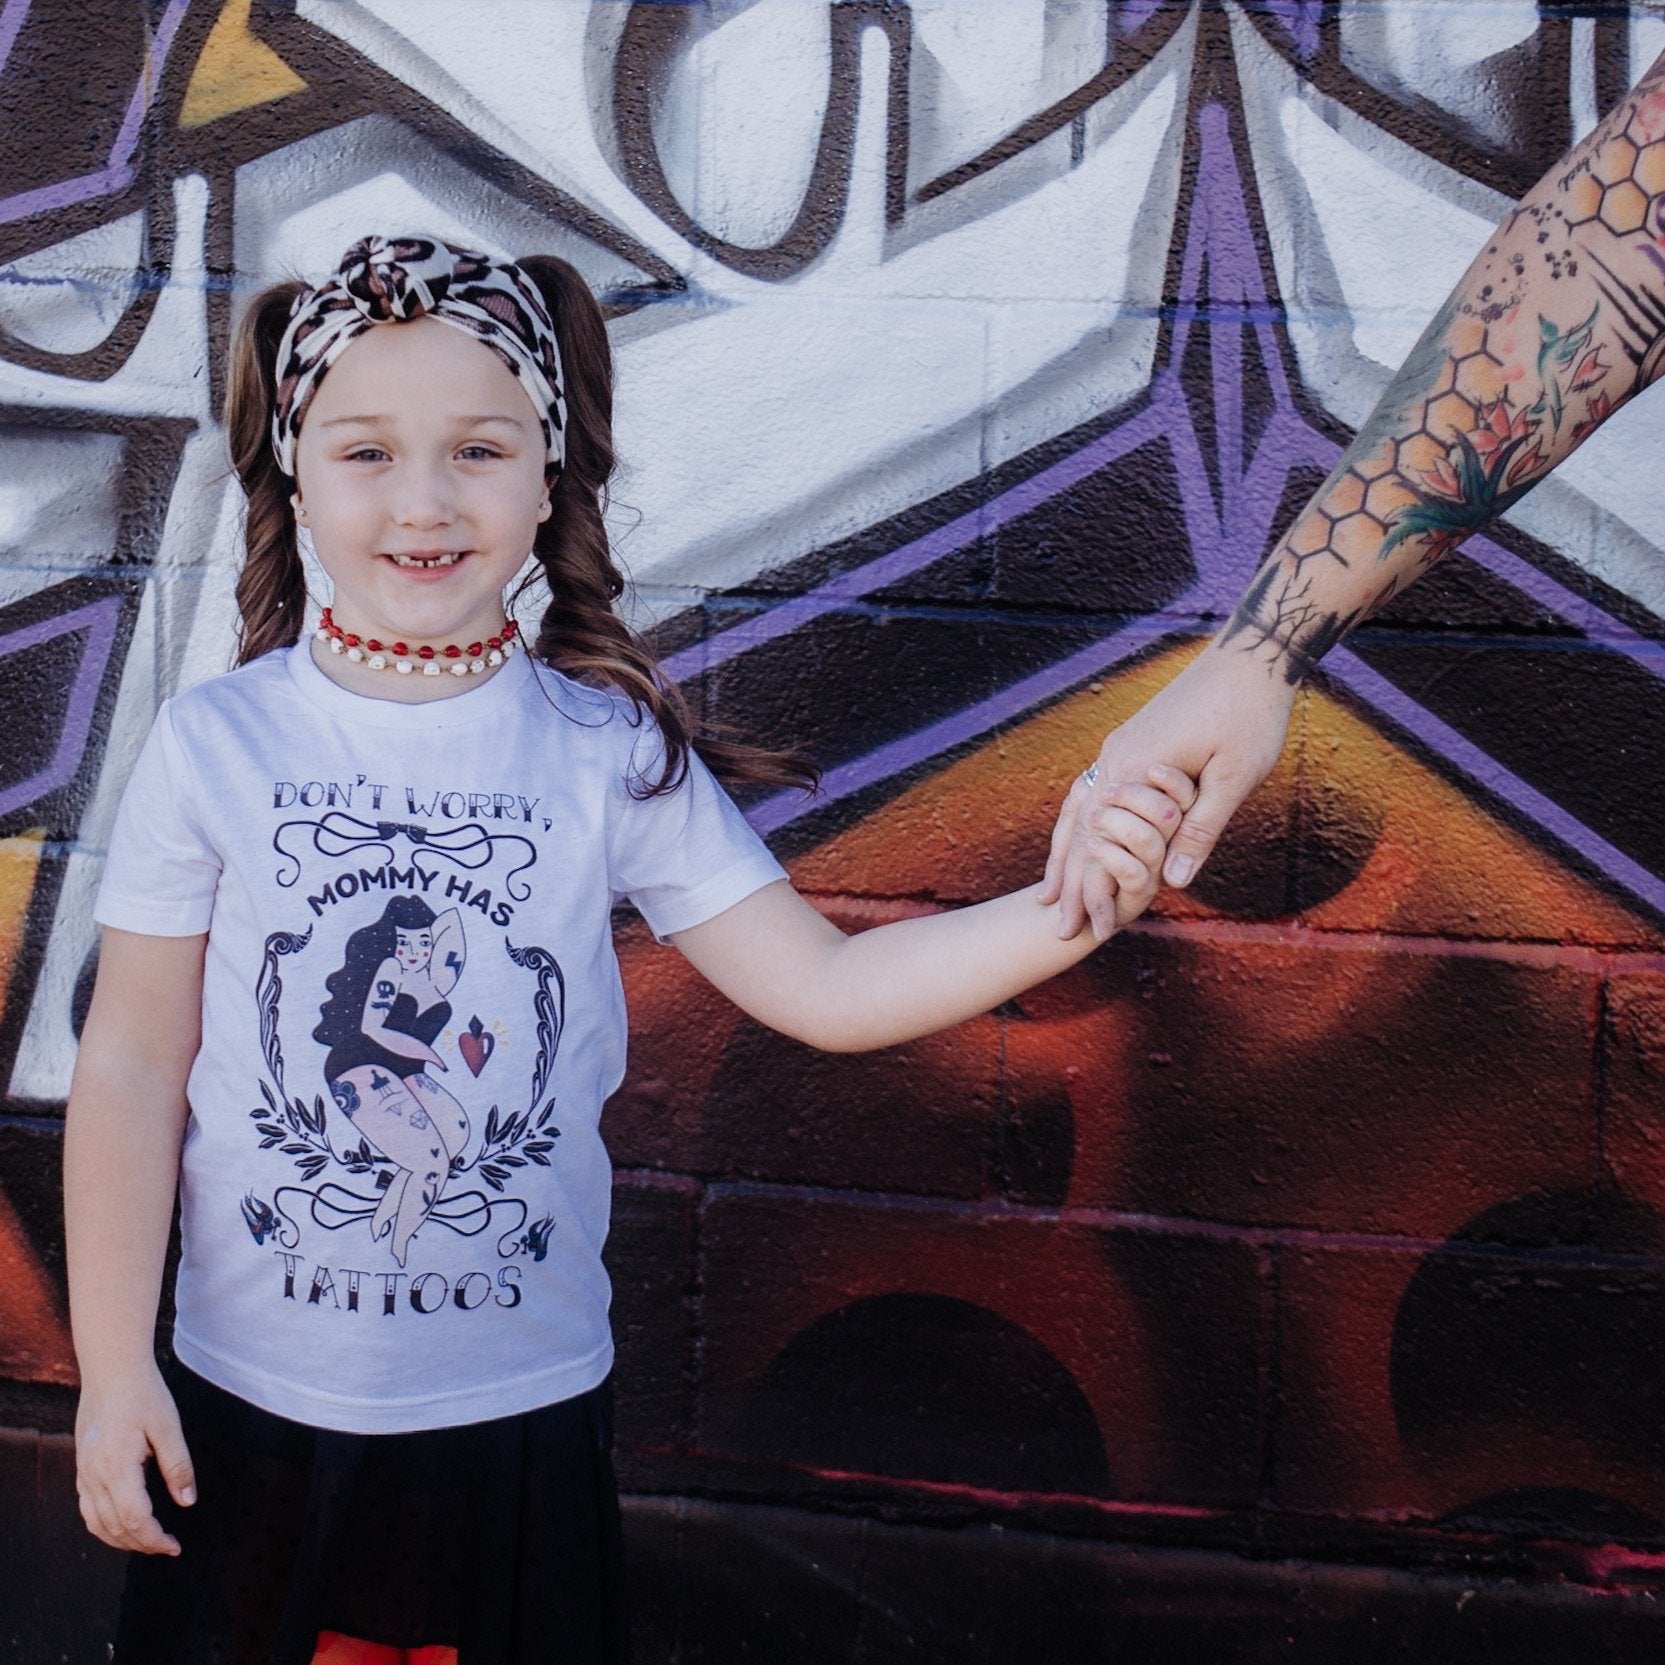 « DON'T WORRY, MOMMY HAS TATTOOS » KID'S TEE